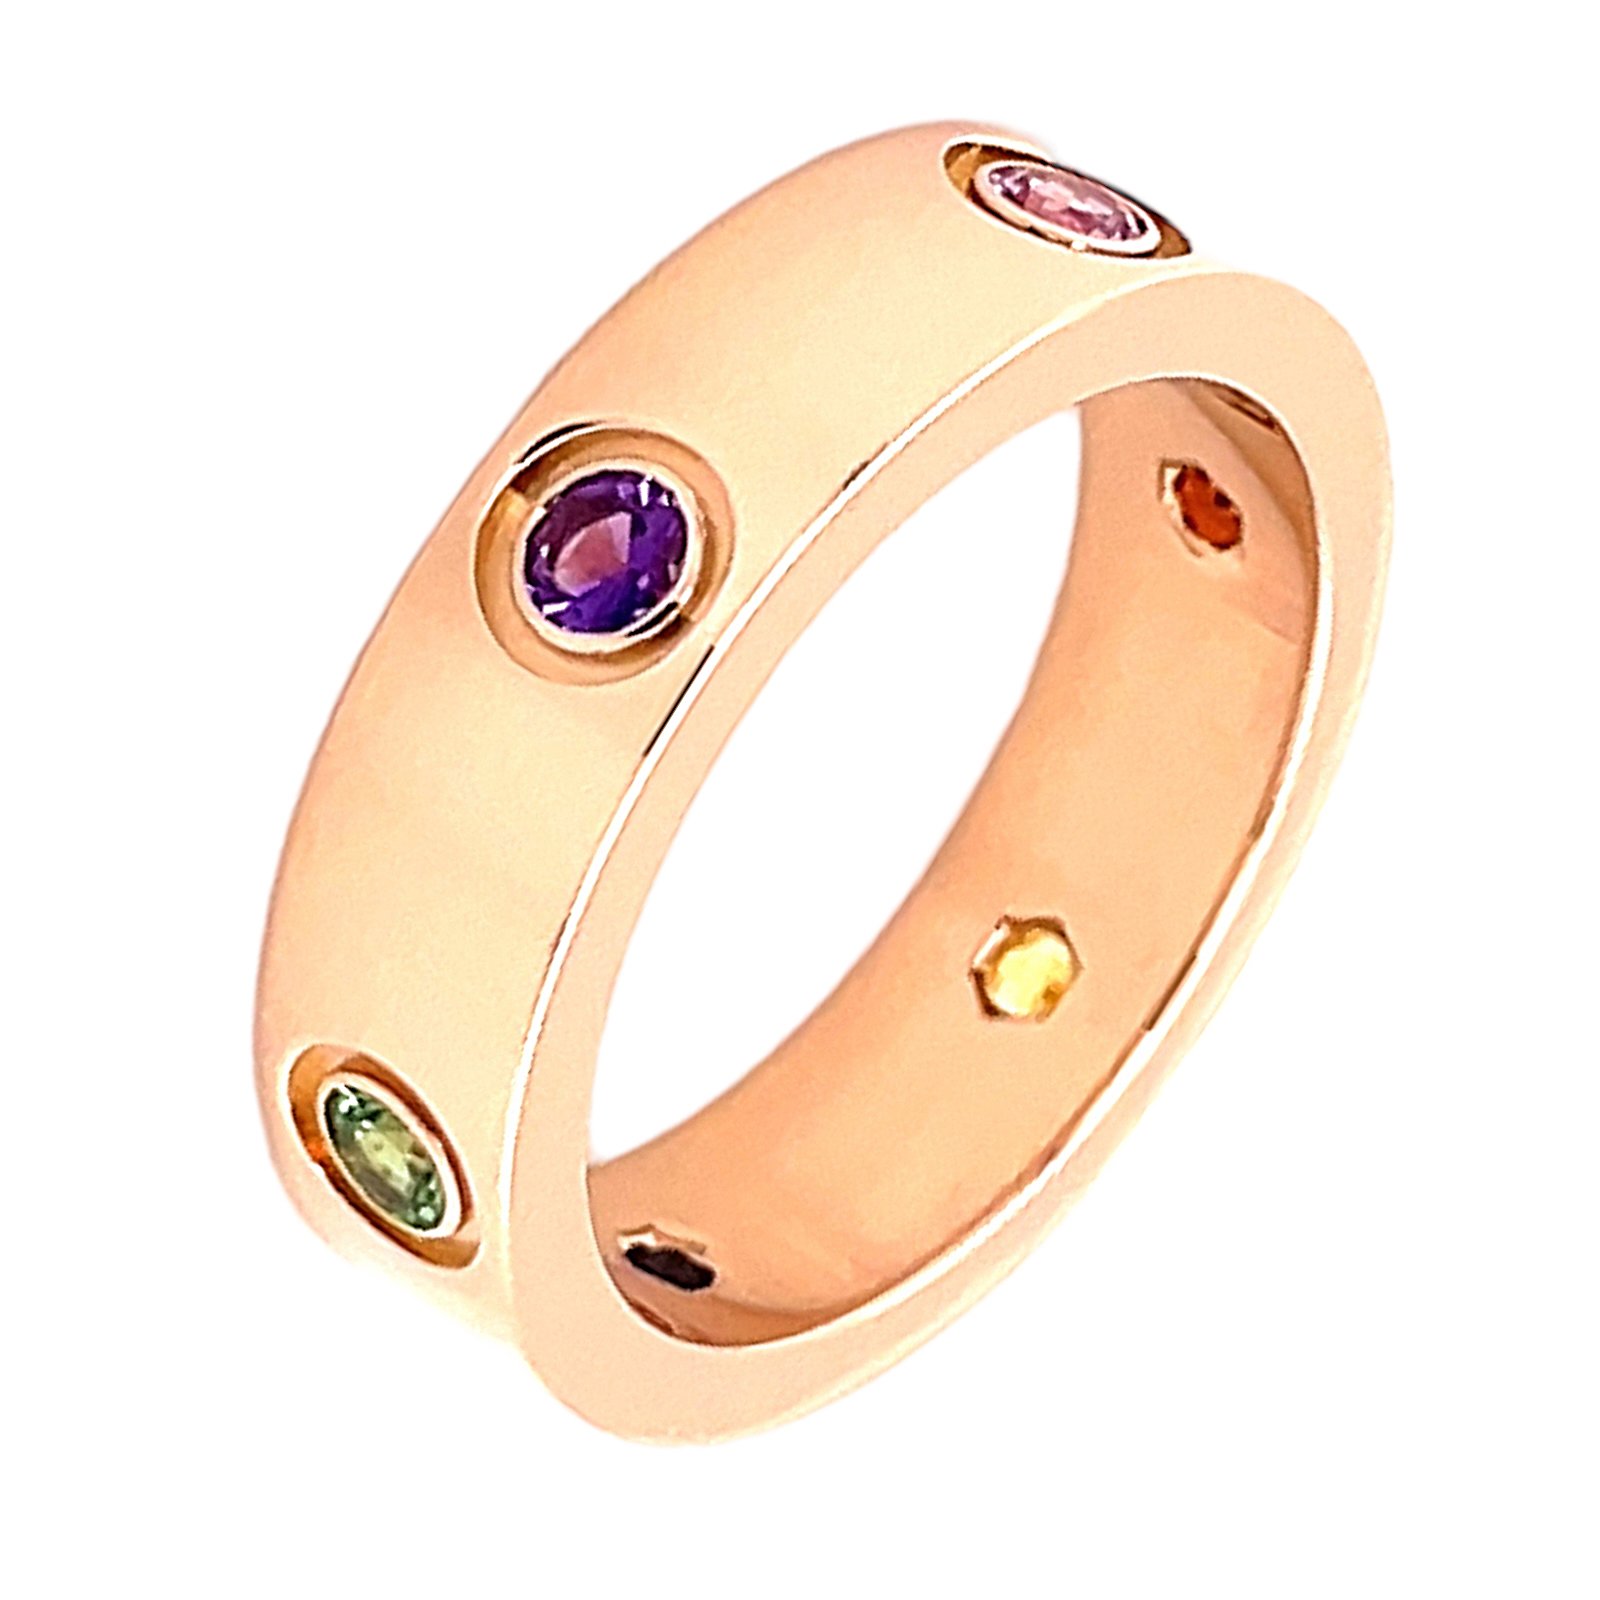 Pre-Owned Cartier Rings for Women – Timeless Vintage